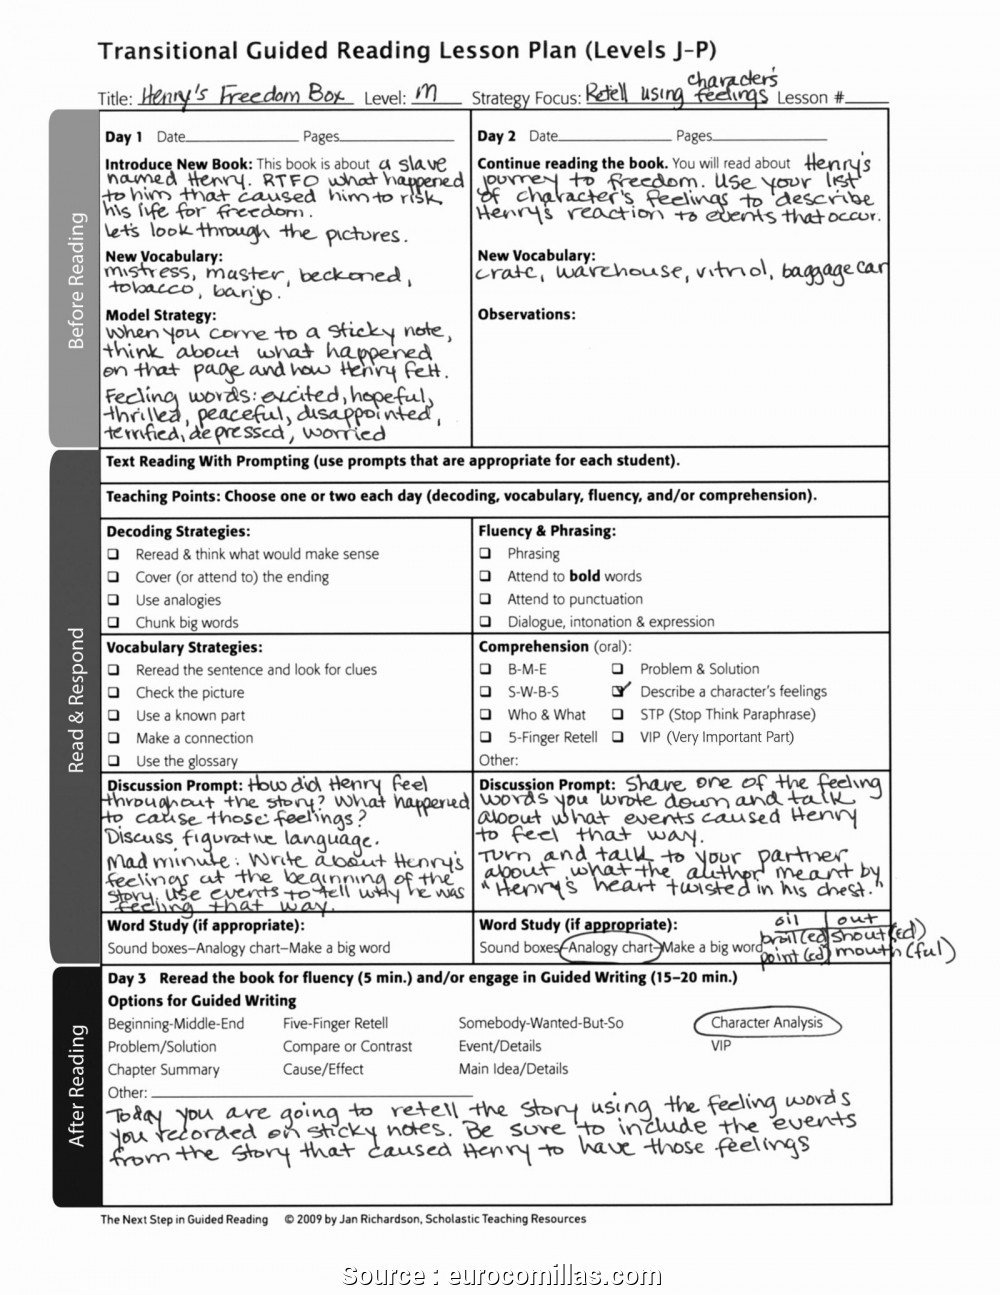 Special Education Lesson Plan Template 5 New Special Education Lesson Plans Reading